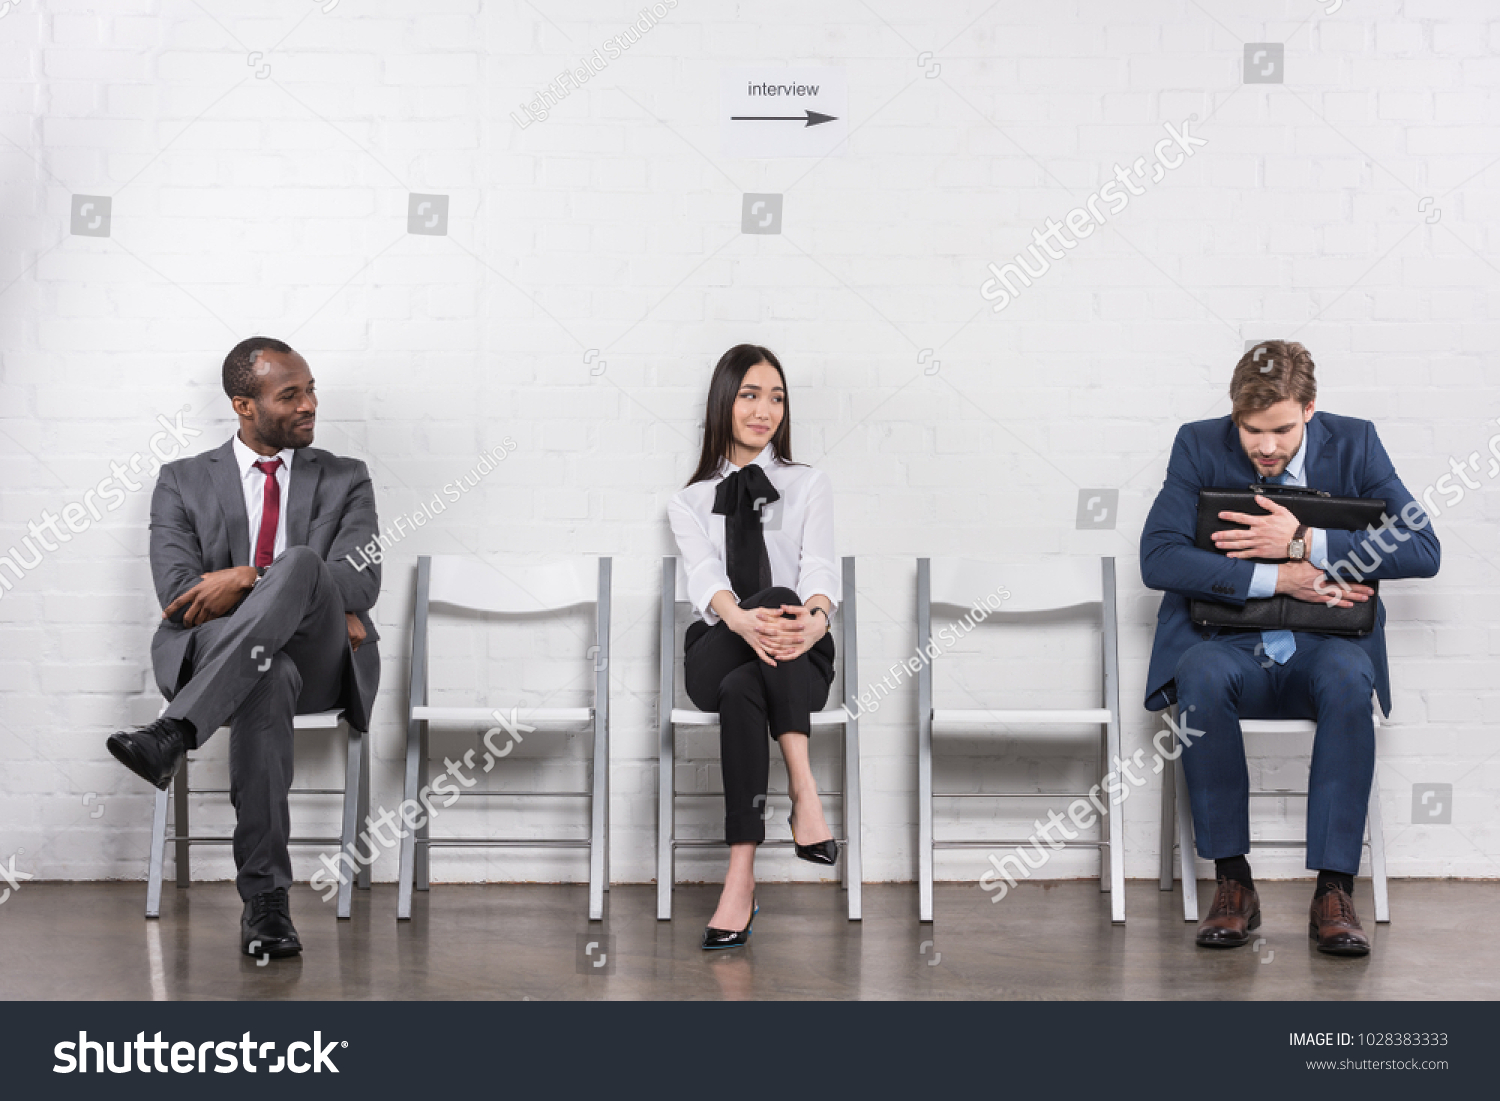 Sitting waiting Interview